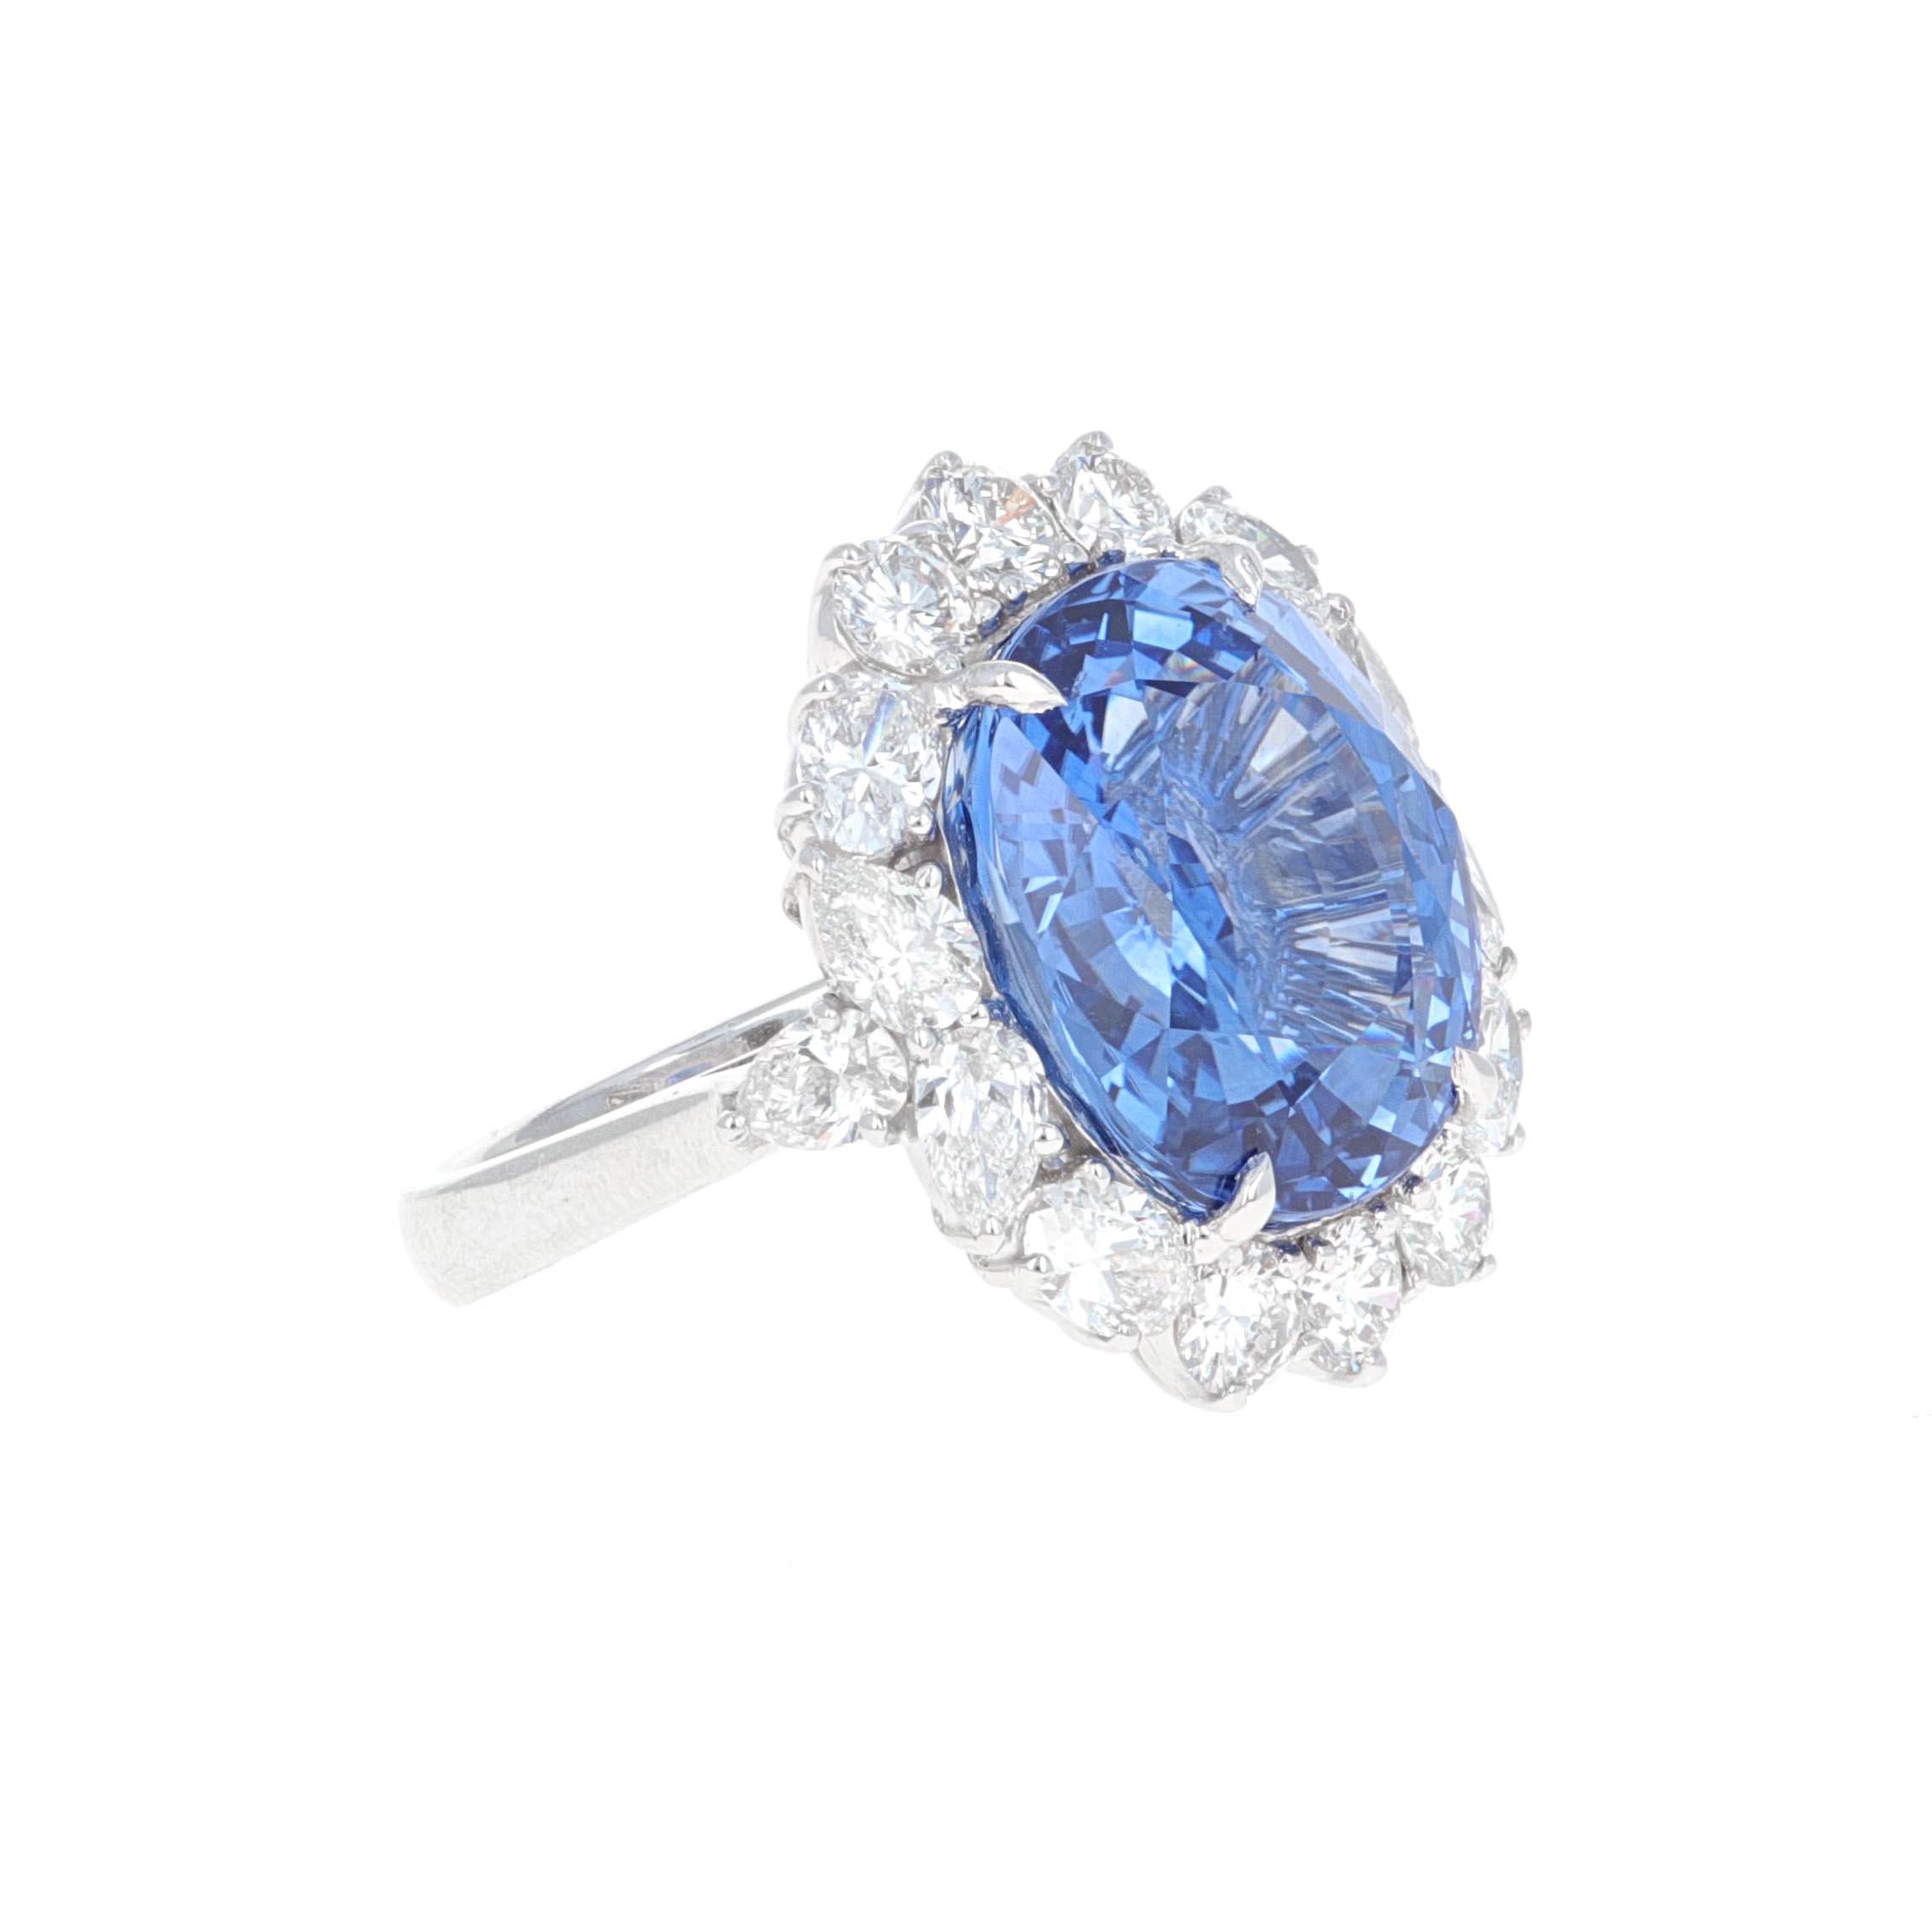 Beautifully hand made 18.83 carat sapphire and diamond cocktail ring. The sapphire has been certified by the Gemological Institute of America,  GIA. GIA describes the stone as a Natural Blue Sapphire with indications of heating. The origin of the